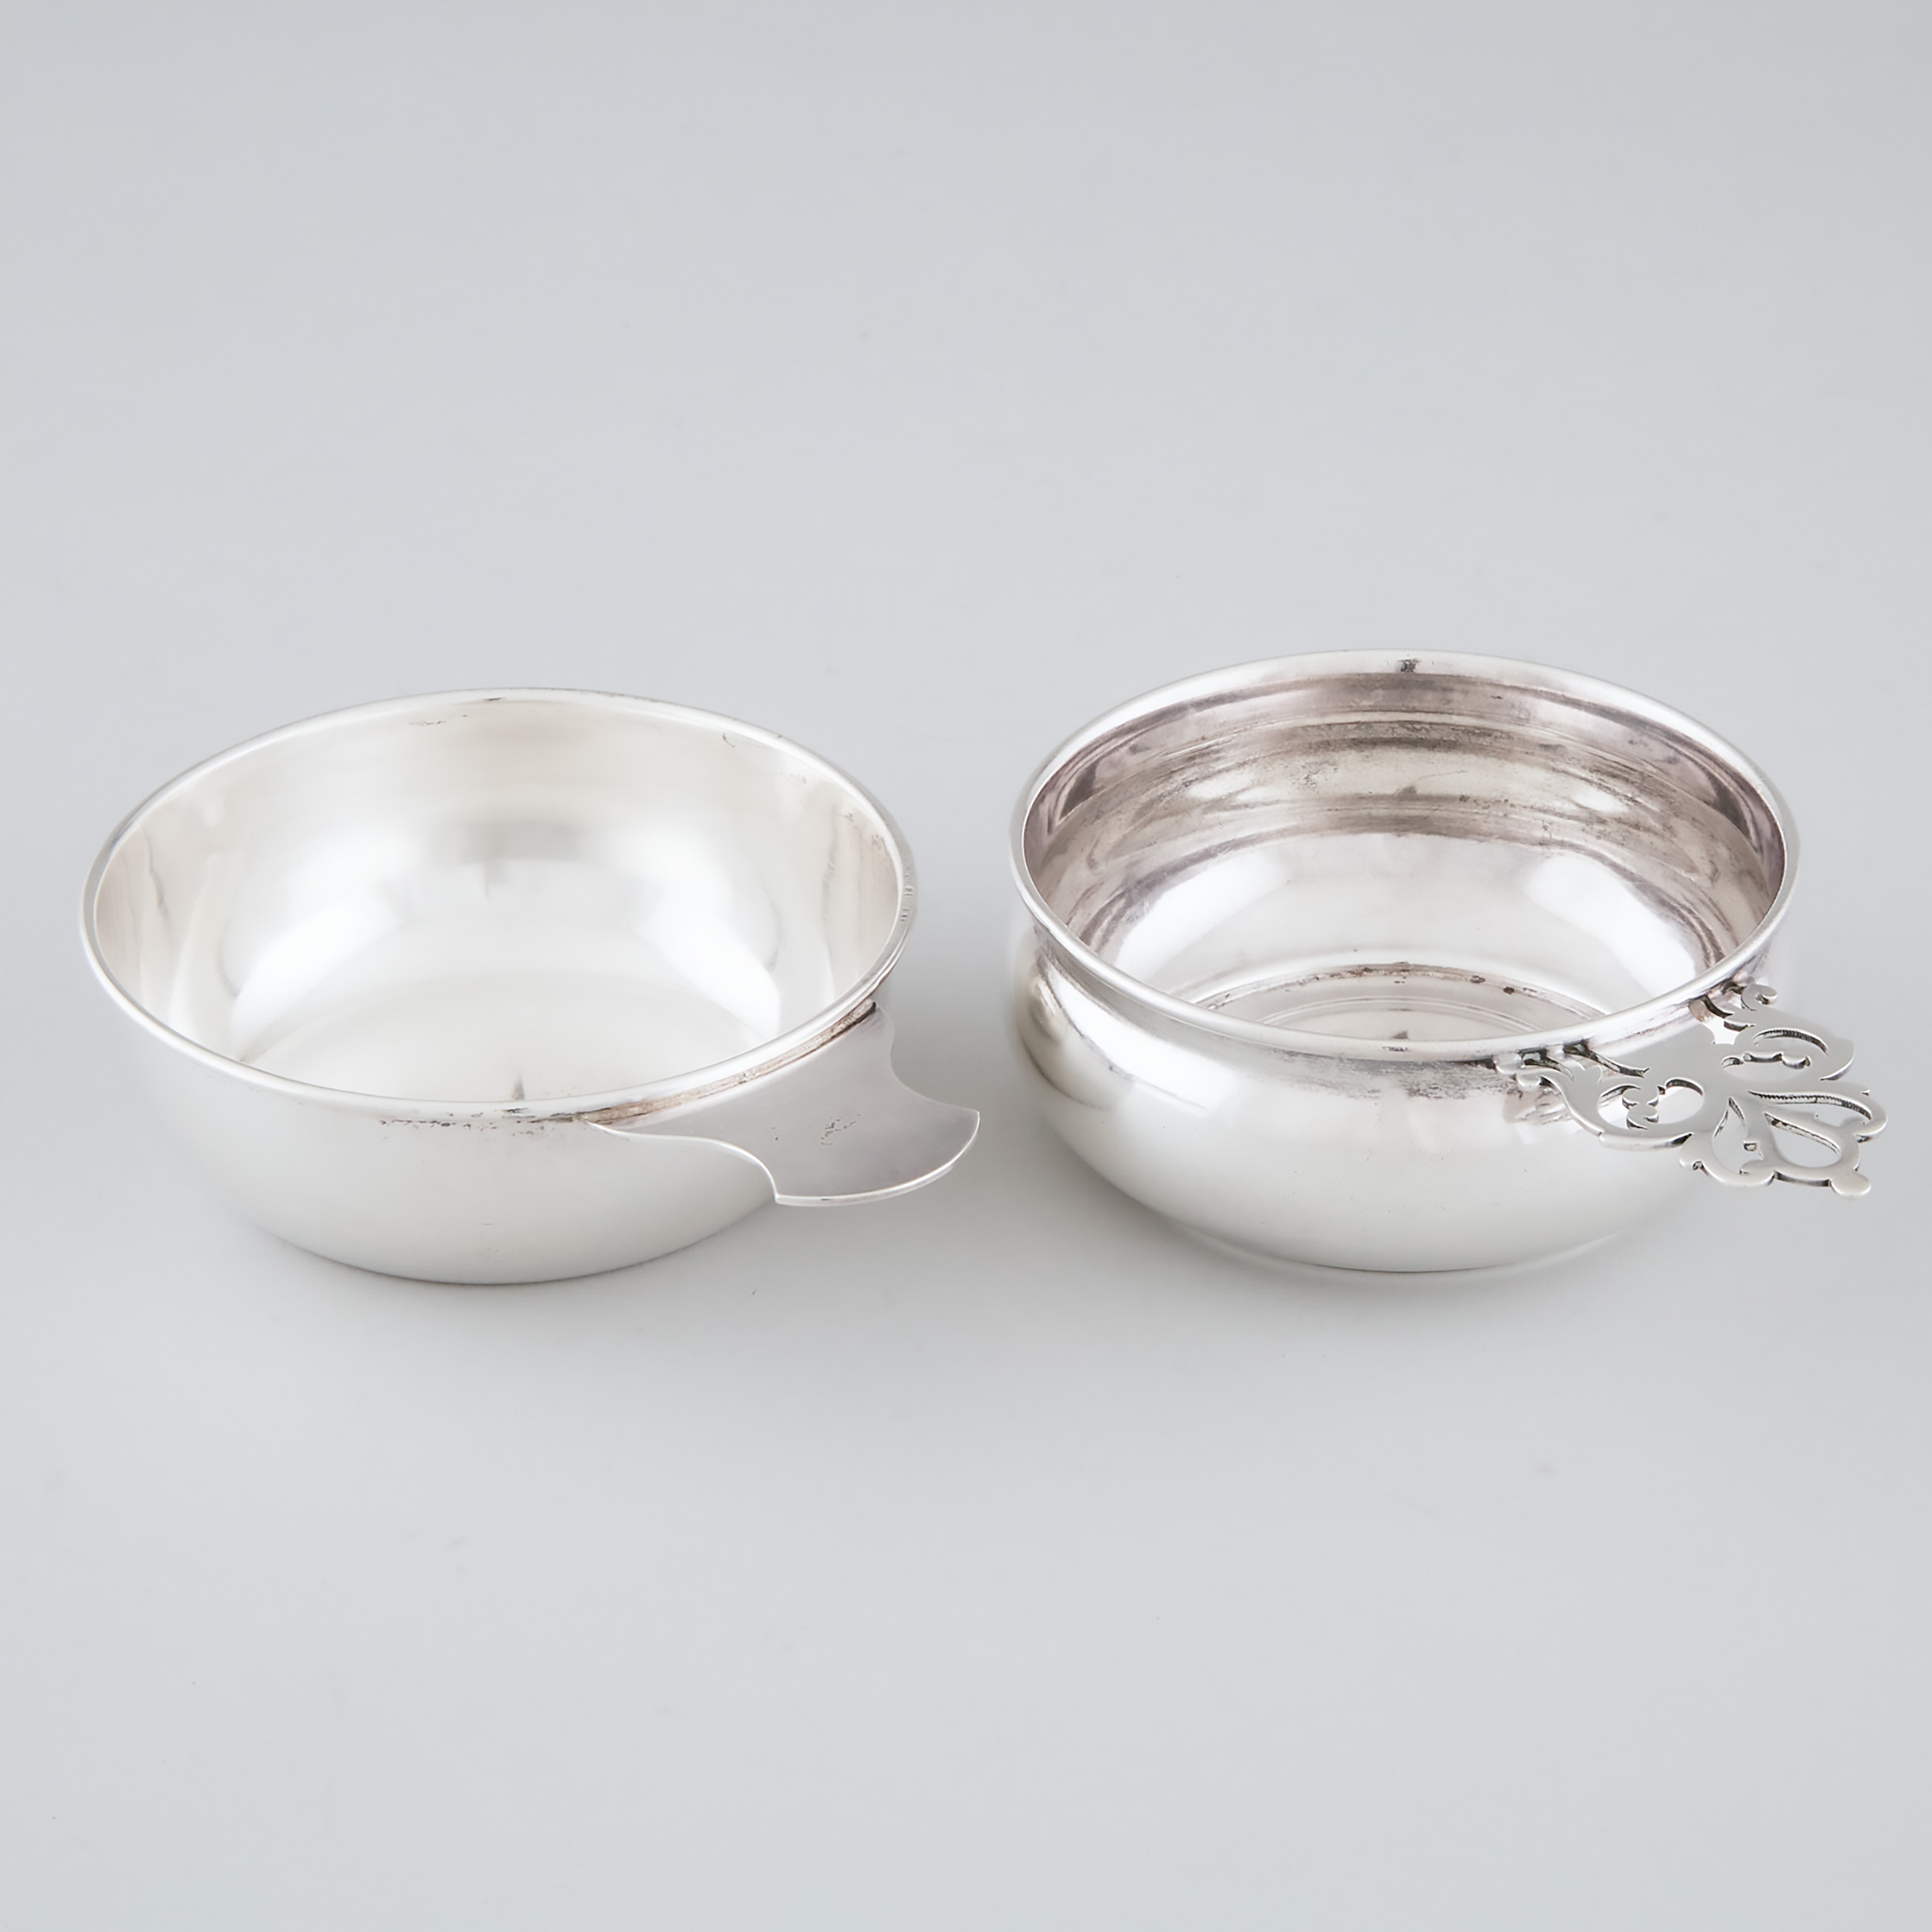 Two Canadian Silver Porringers, Henry Birks & Sons, Montreal, Que., 20th century